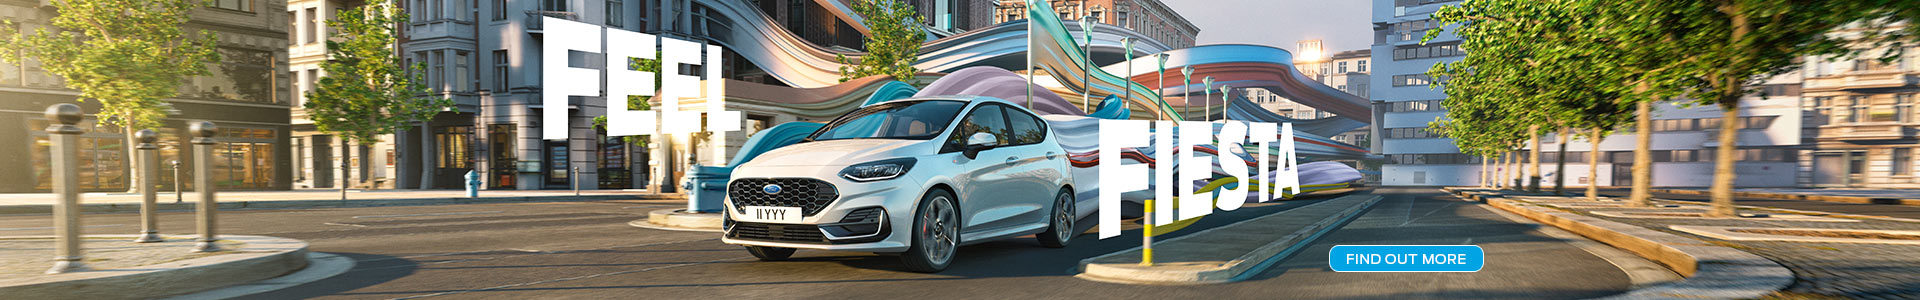 New Ford Fiesta - Find out more